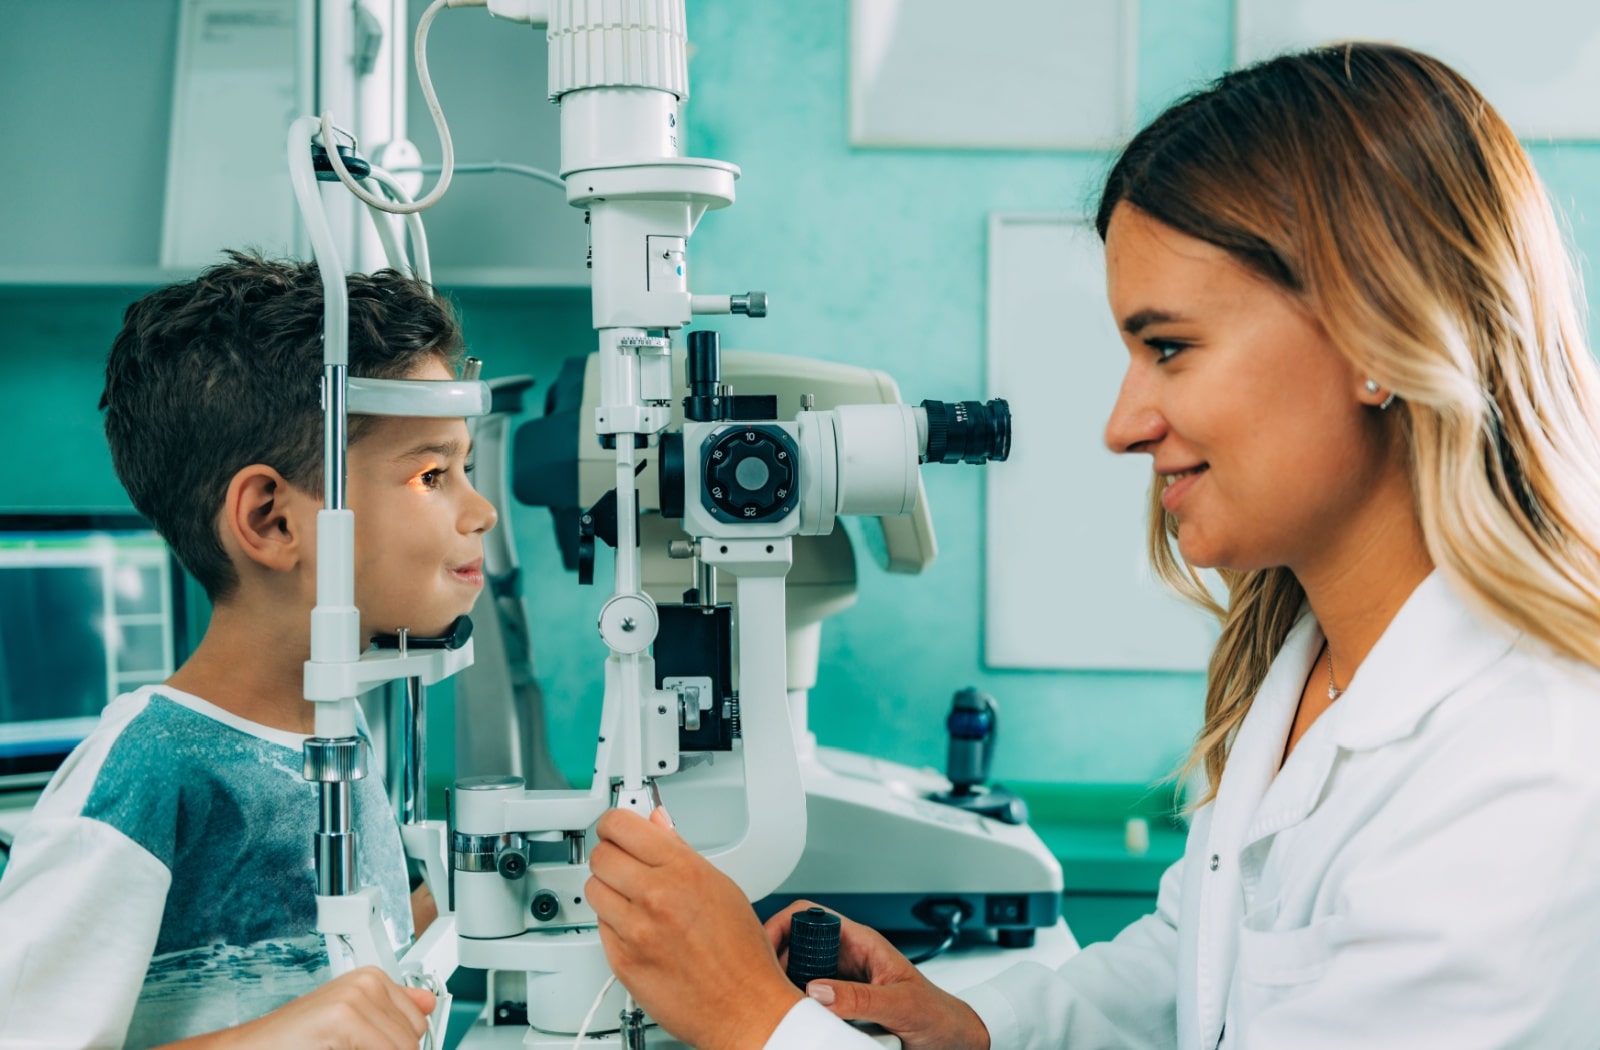 A female optometrist examines a young boy's eyes with a slit lamp